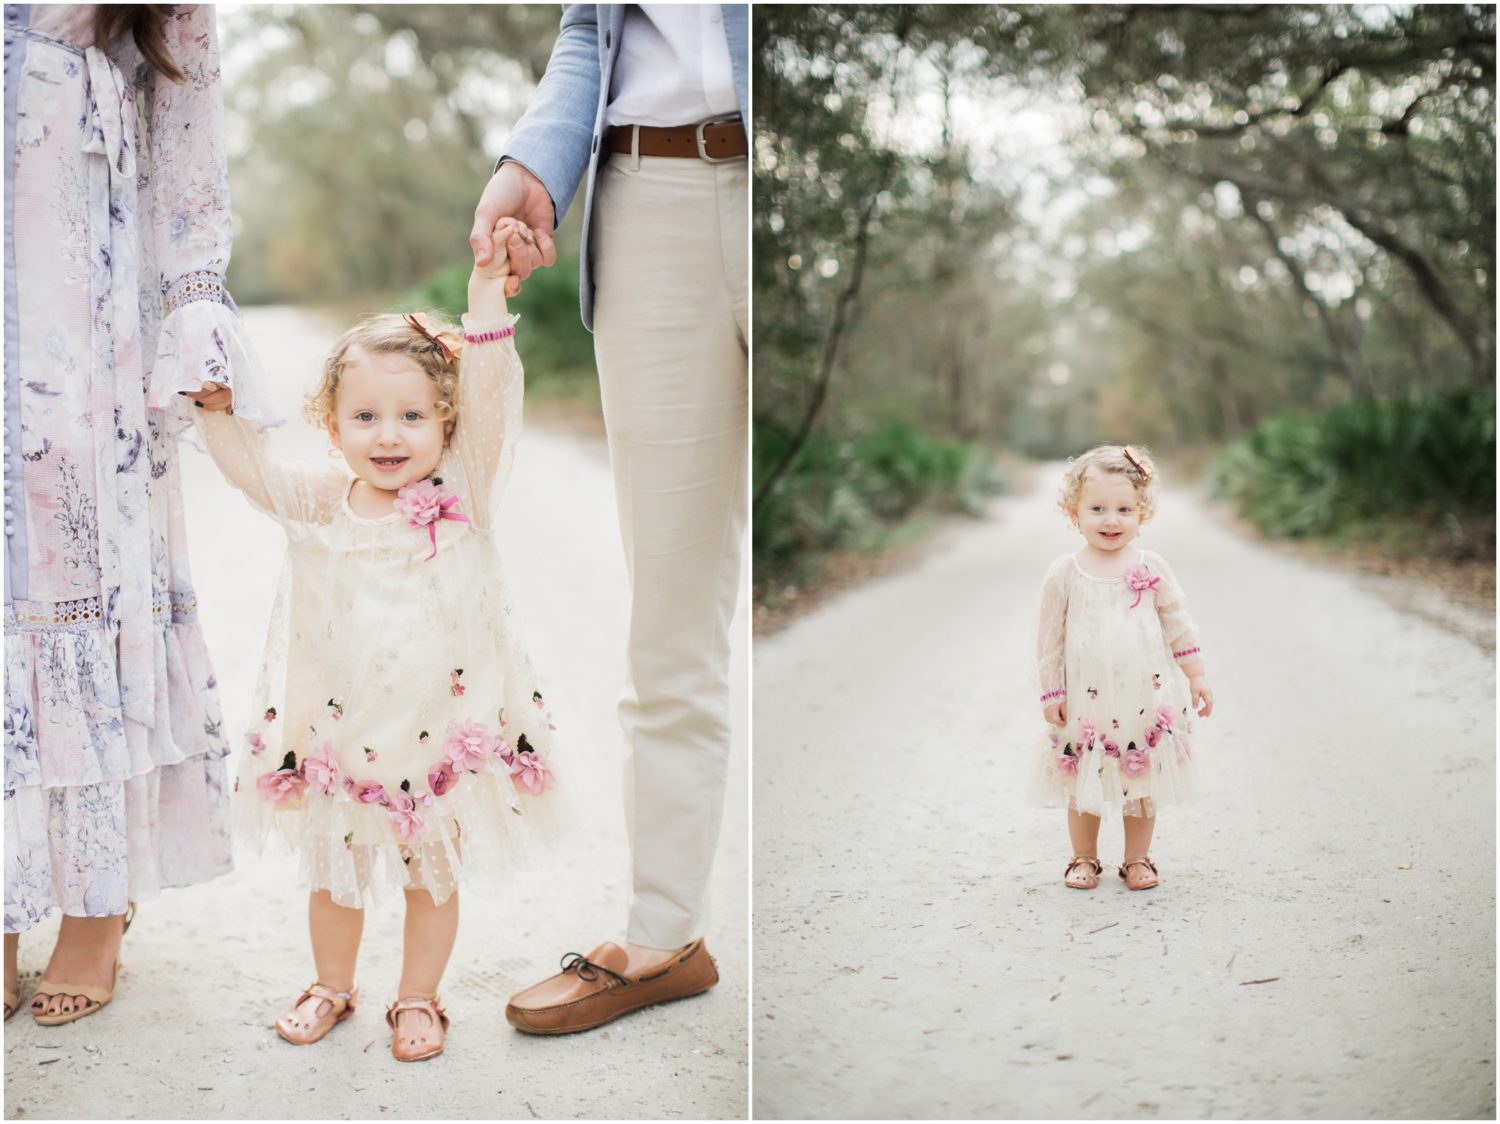 Jacksonville Lifestyle Photographers, Brooke Images, Beach Session, Family Session, Maternity Session, The Wynne Family